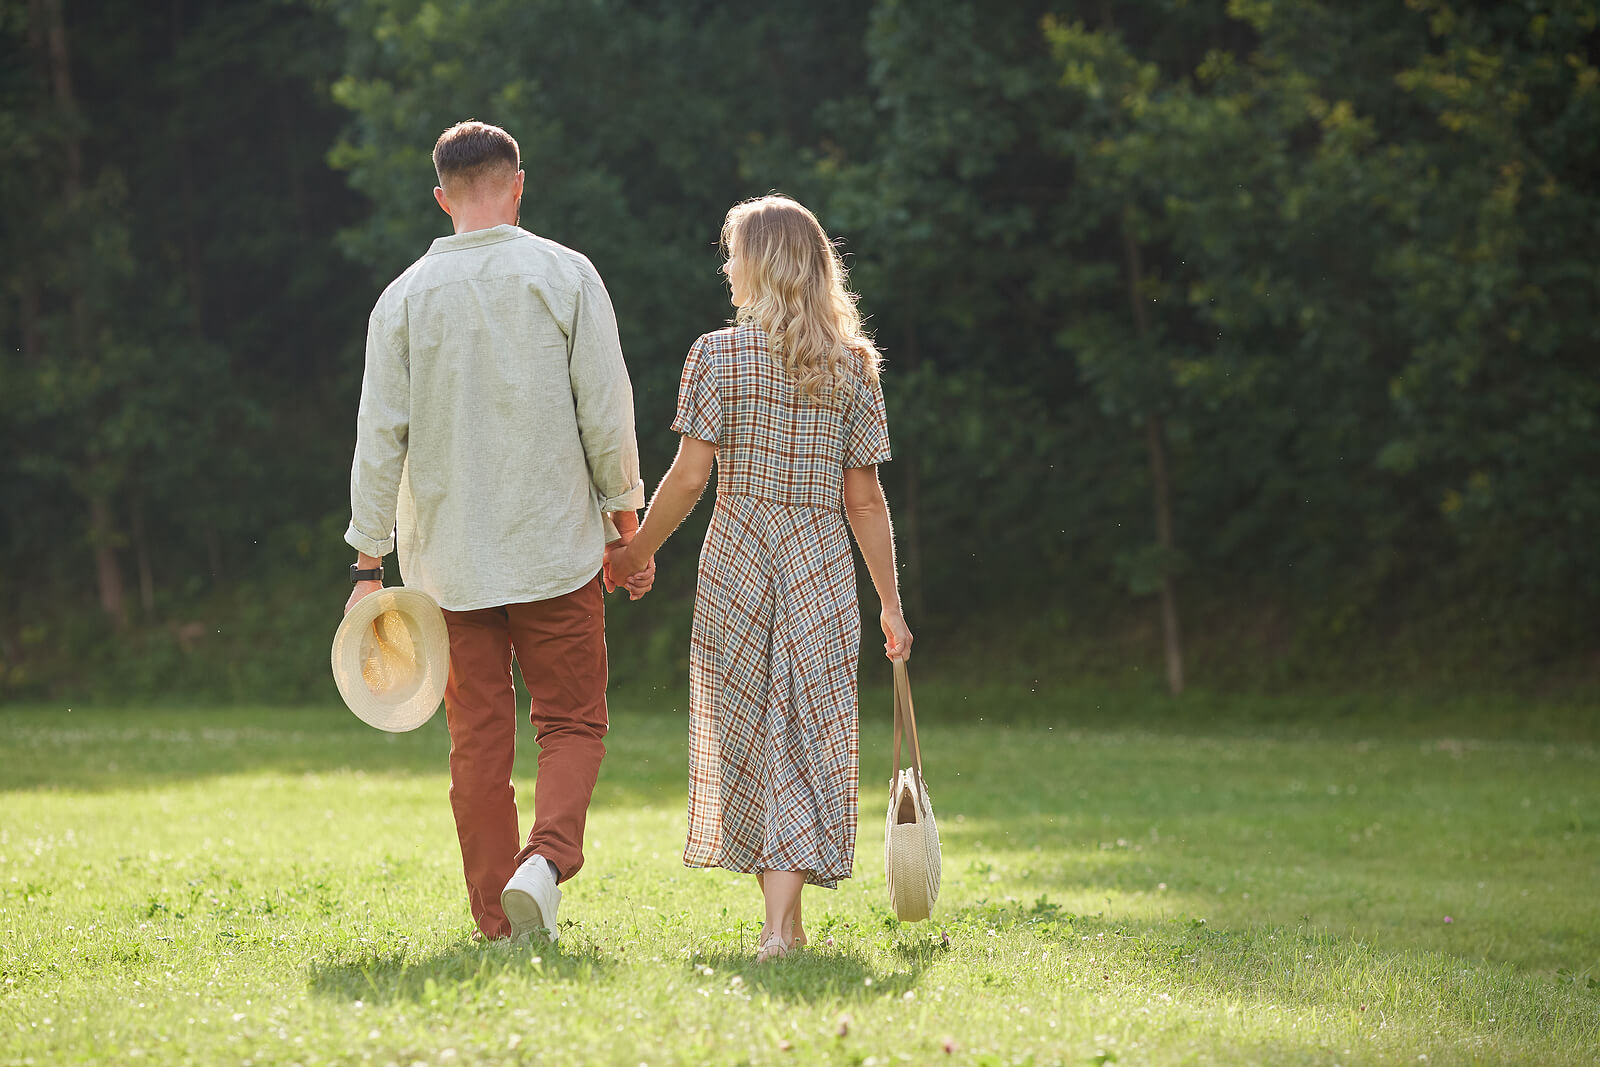 Image of a couple smiling and holding hands as they walk across grass. Find helpful places to date your partner in Las Vegas, NV here! Create positive changes in your life with the help of DBT therapy in Las Vegas, NV!